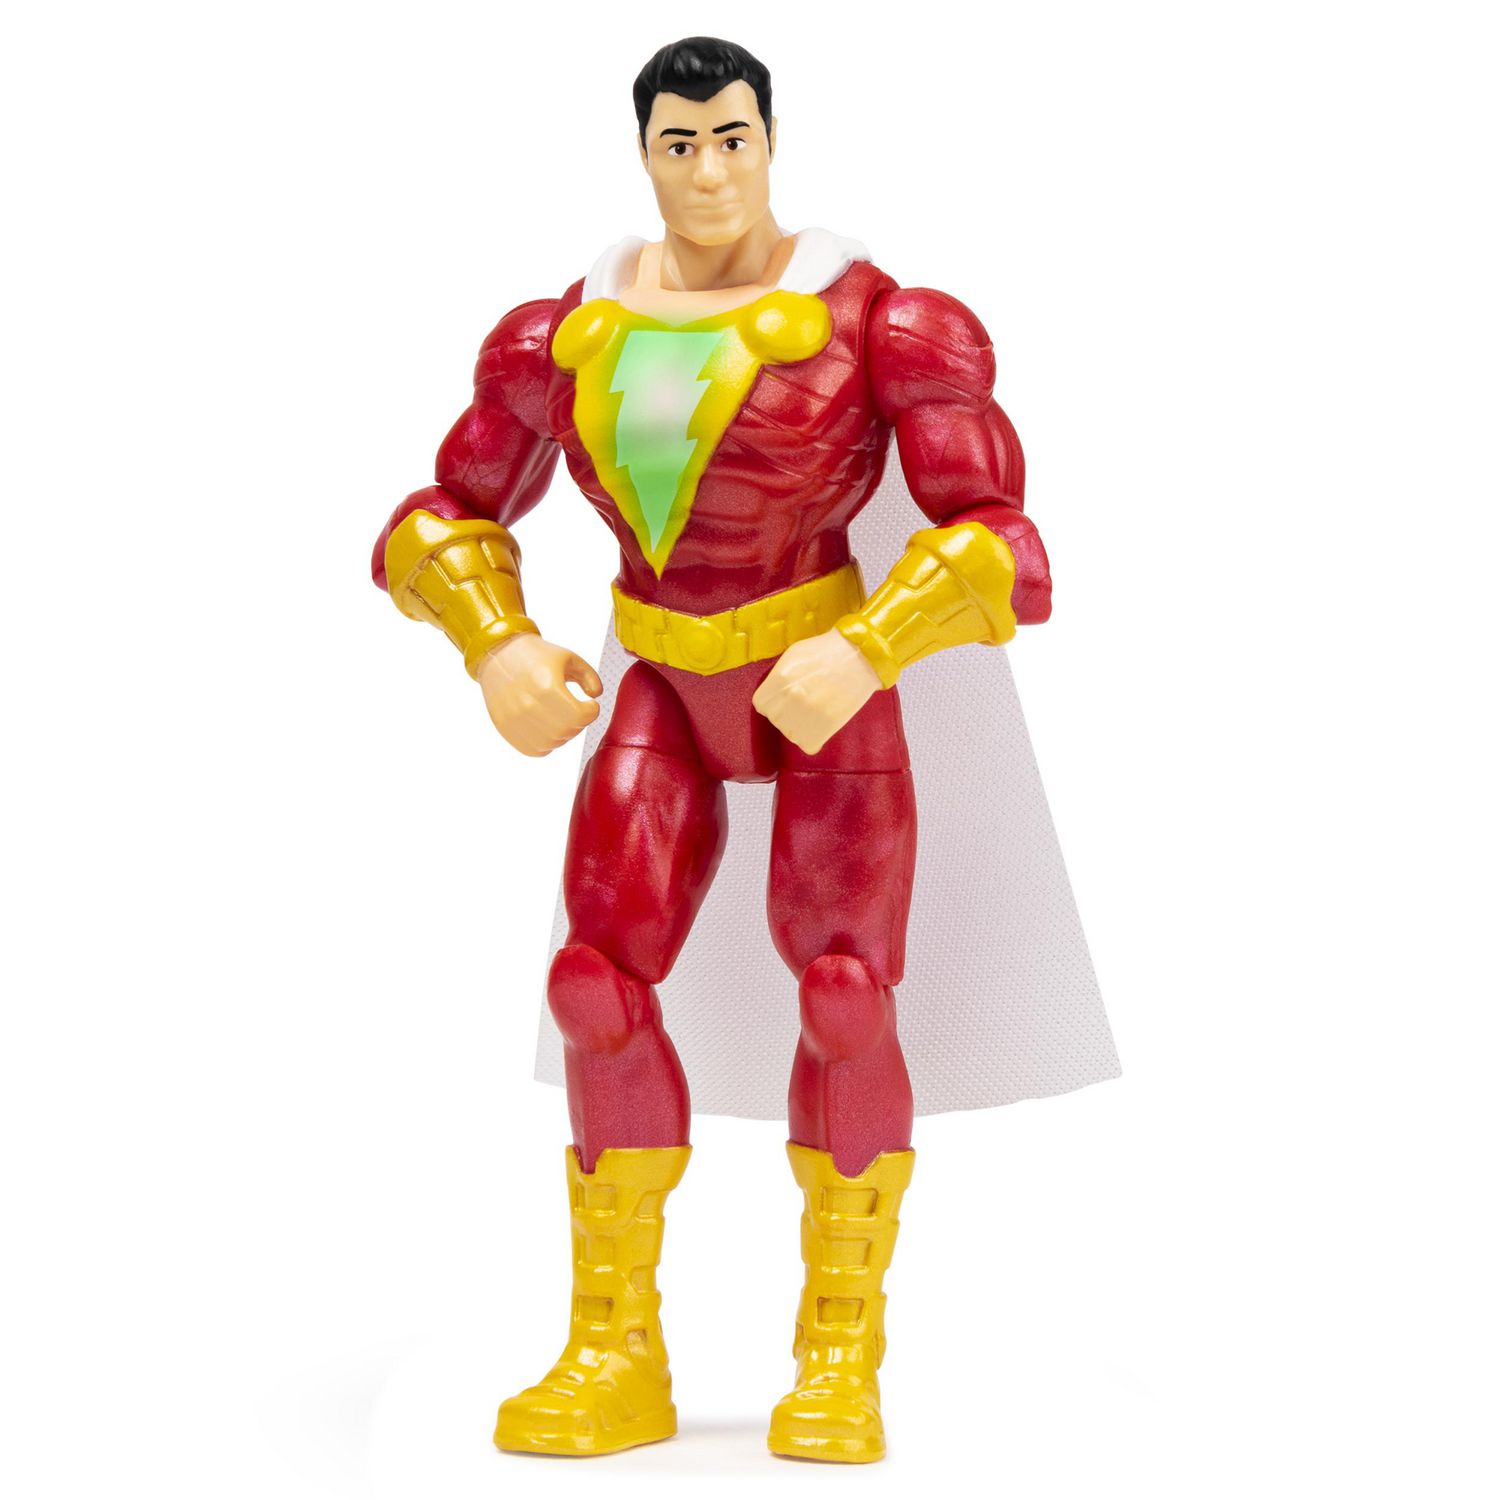 DC Comics 4-inch SHAZAM! Action Figure with 3 Mystery Accessories